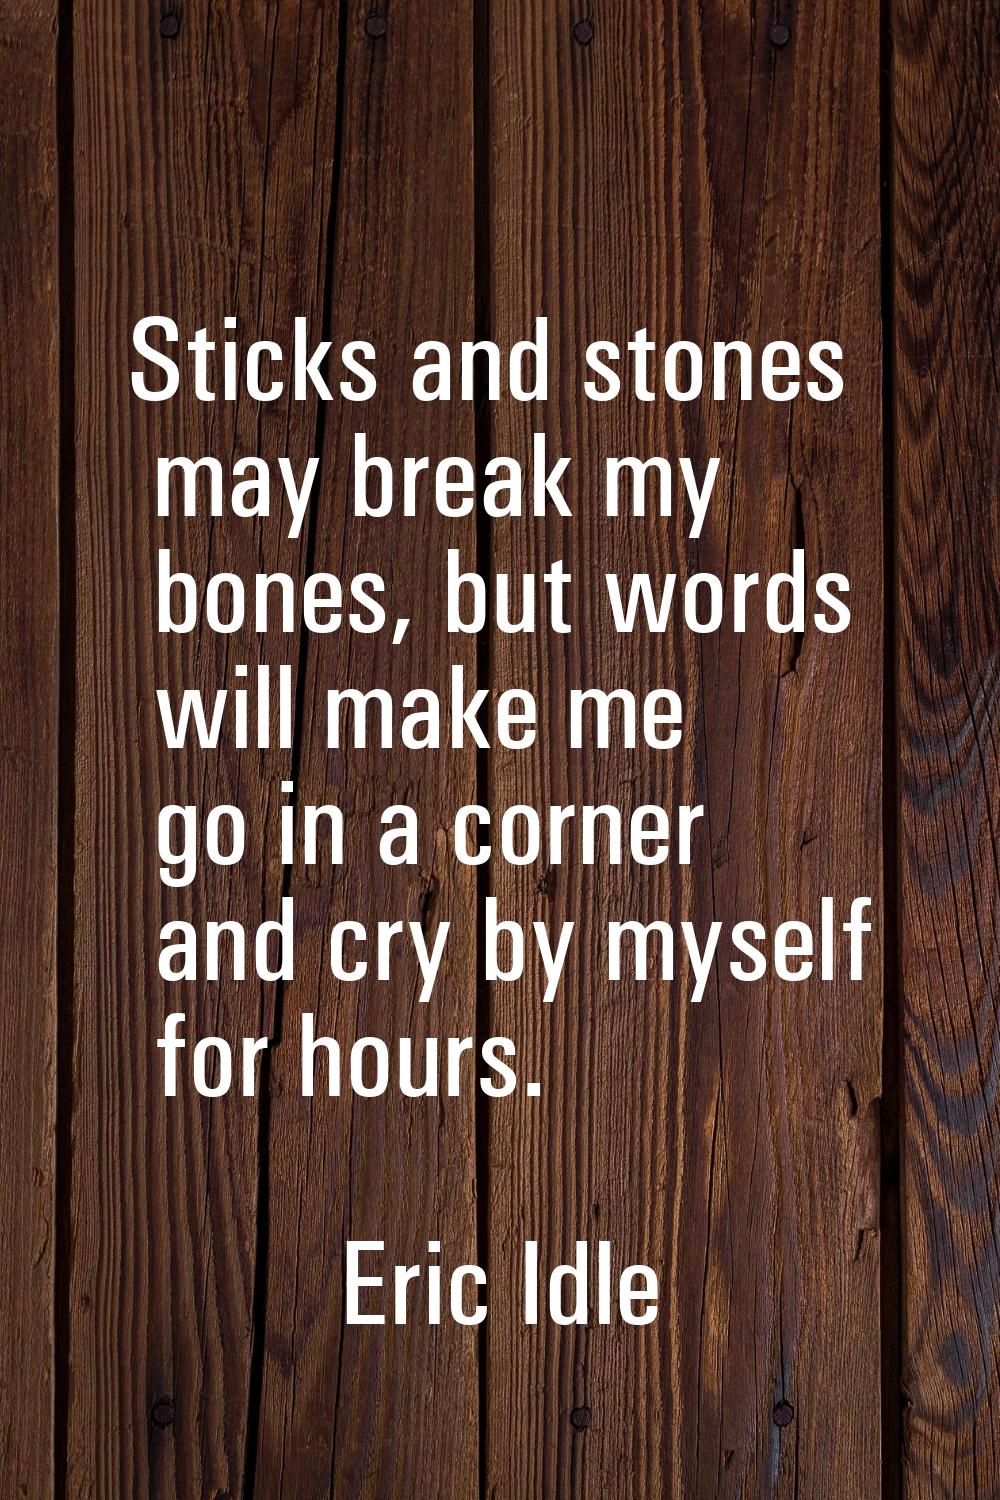 Sticks and stones may break my bones, but words will make me go in a corner and cry by myself for h